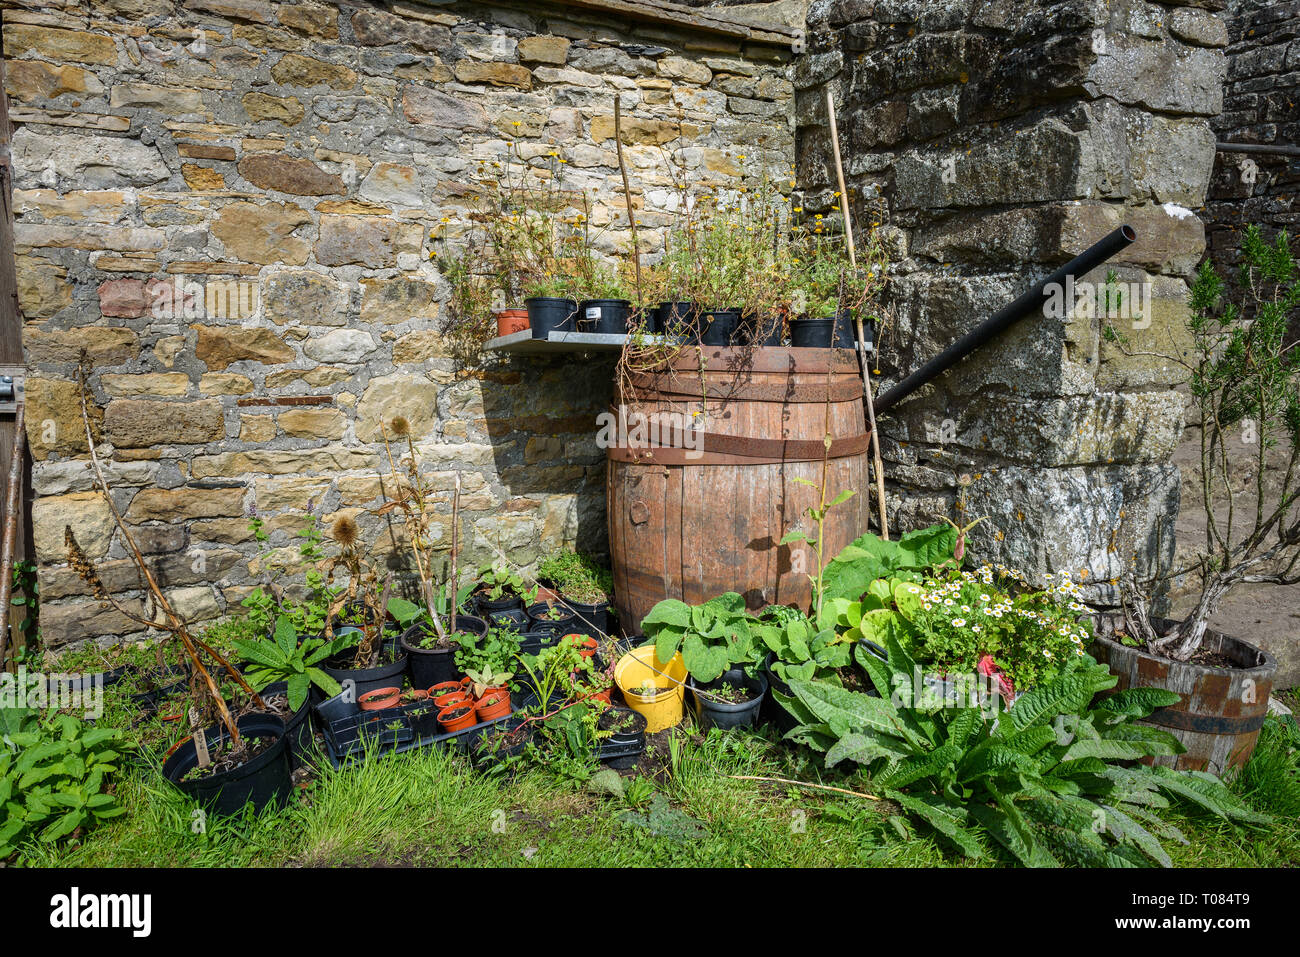 Old oak barrel with overgrown plants in pots in a stone walled cottage garden. Stock Photo